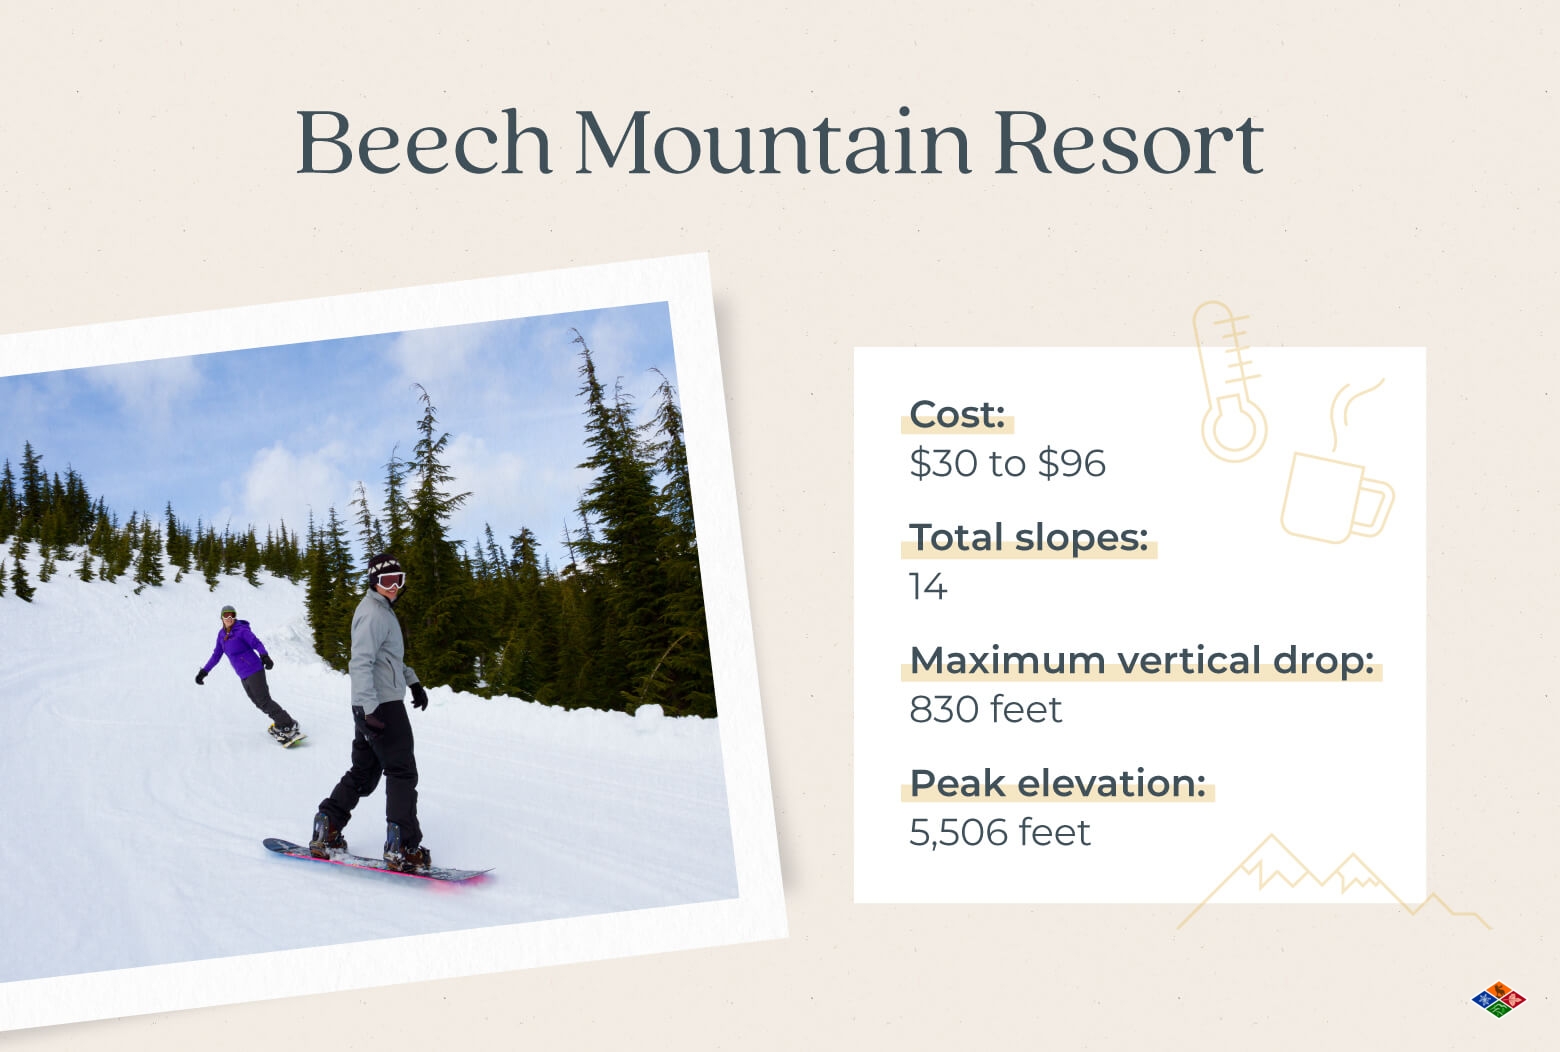 An overview of what skiers can expect at the Beech Mountain Resort. 